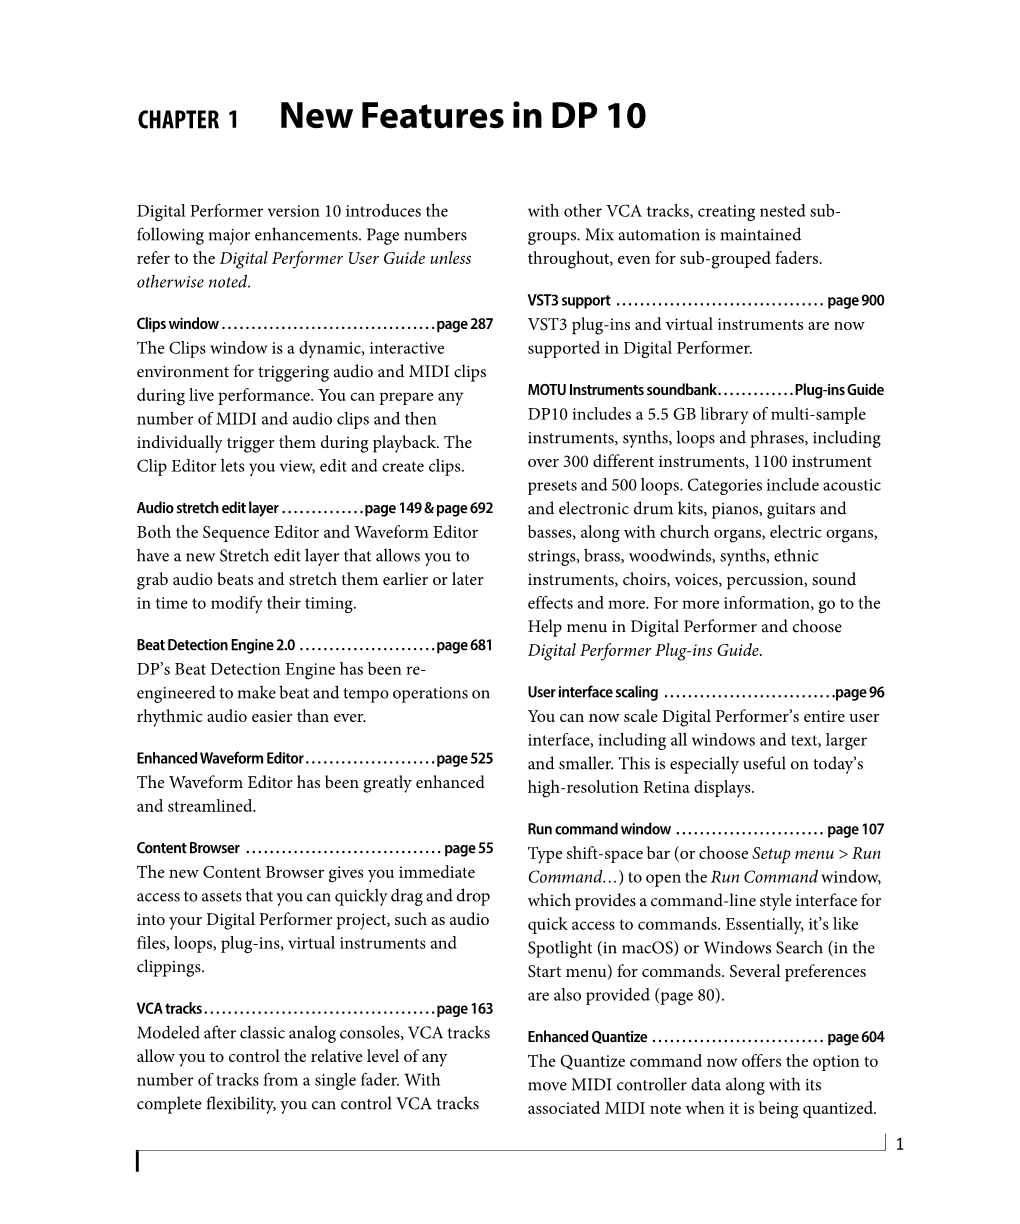 New Features in Digital Performer 10